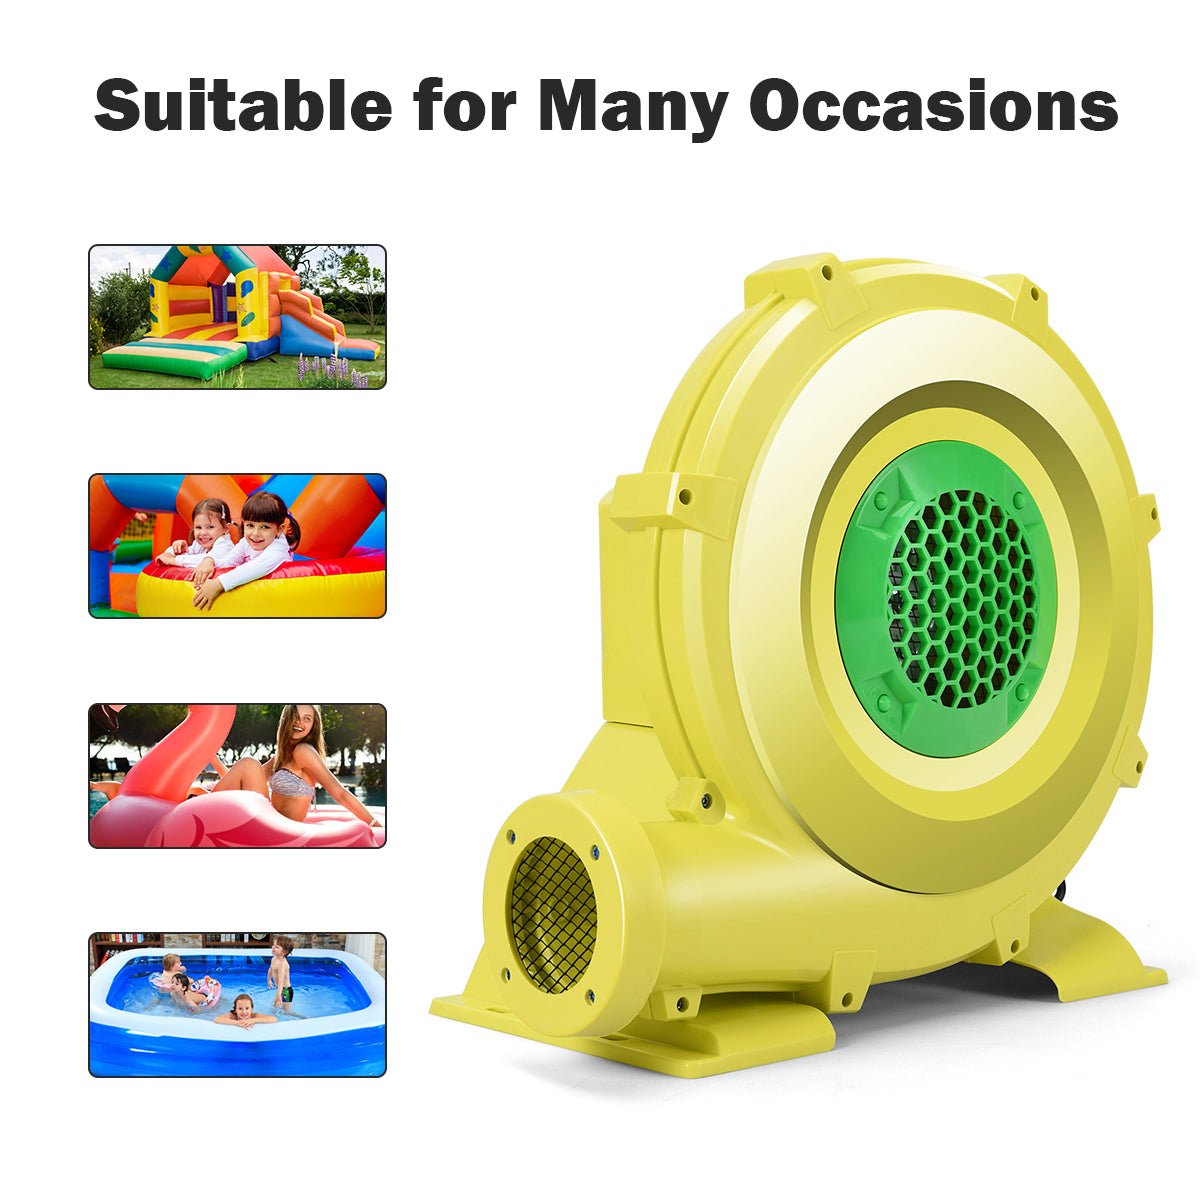 Elevate Playtime: 750W Commercial Air Blower Pump for Bounce House Adventures